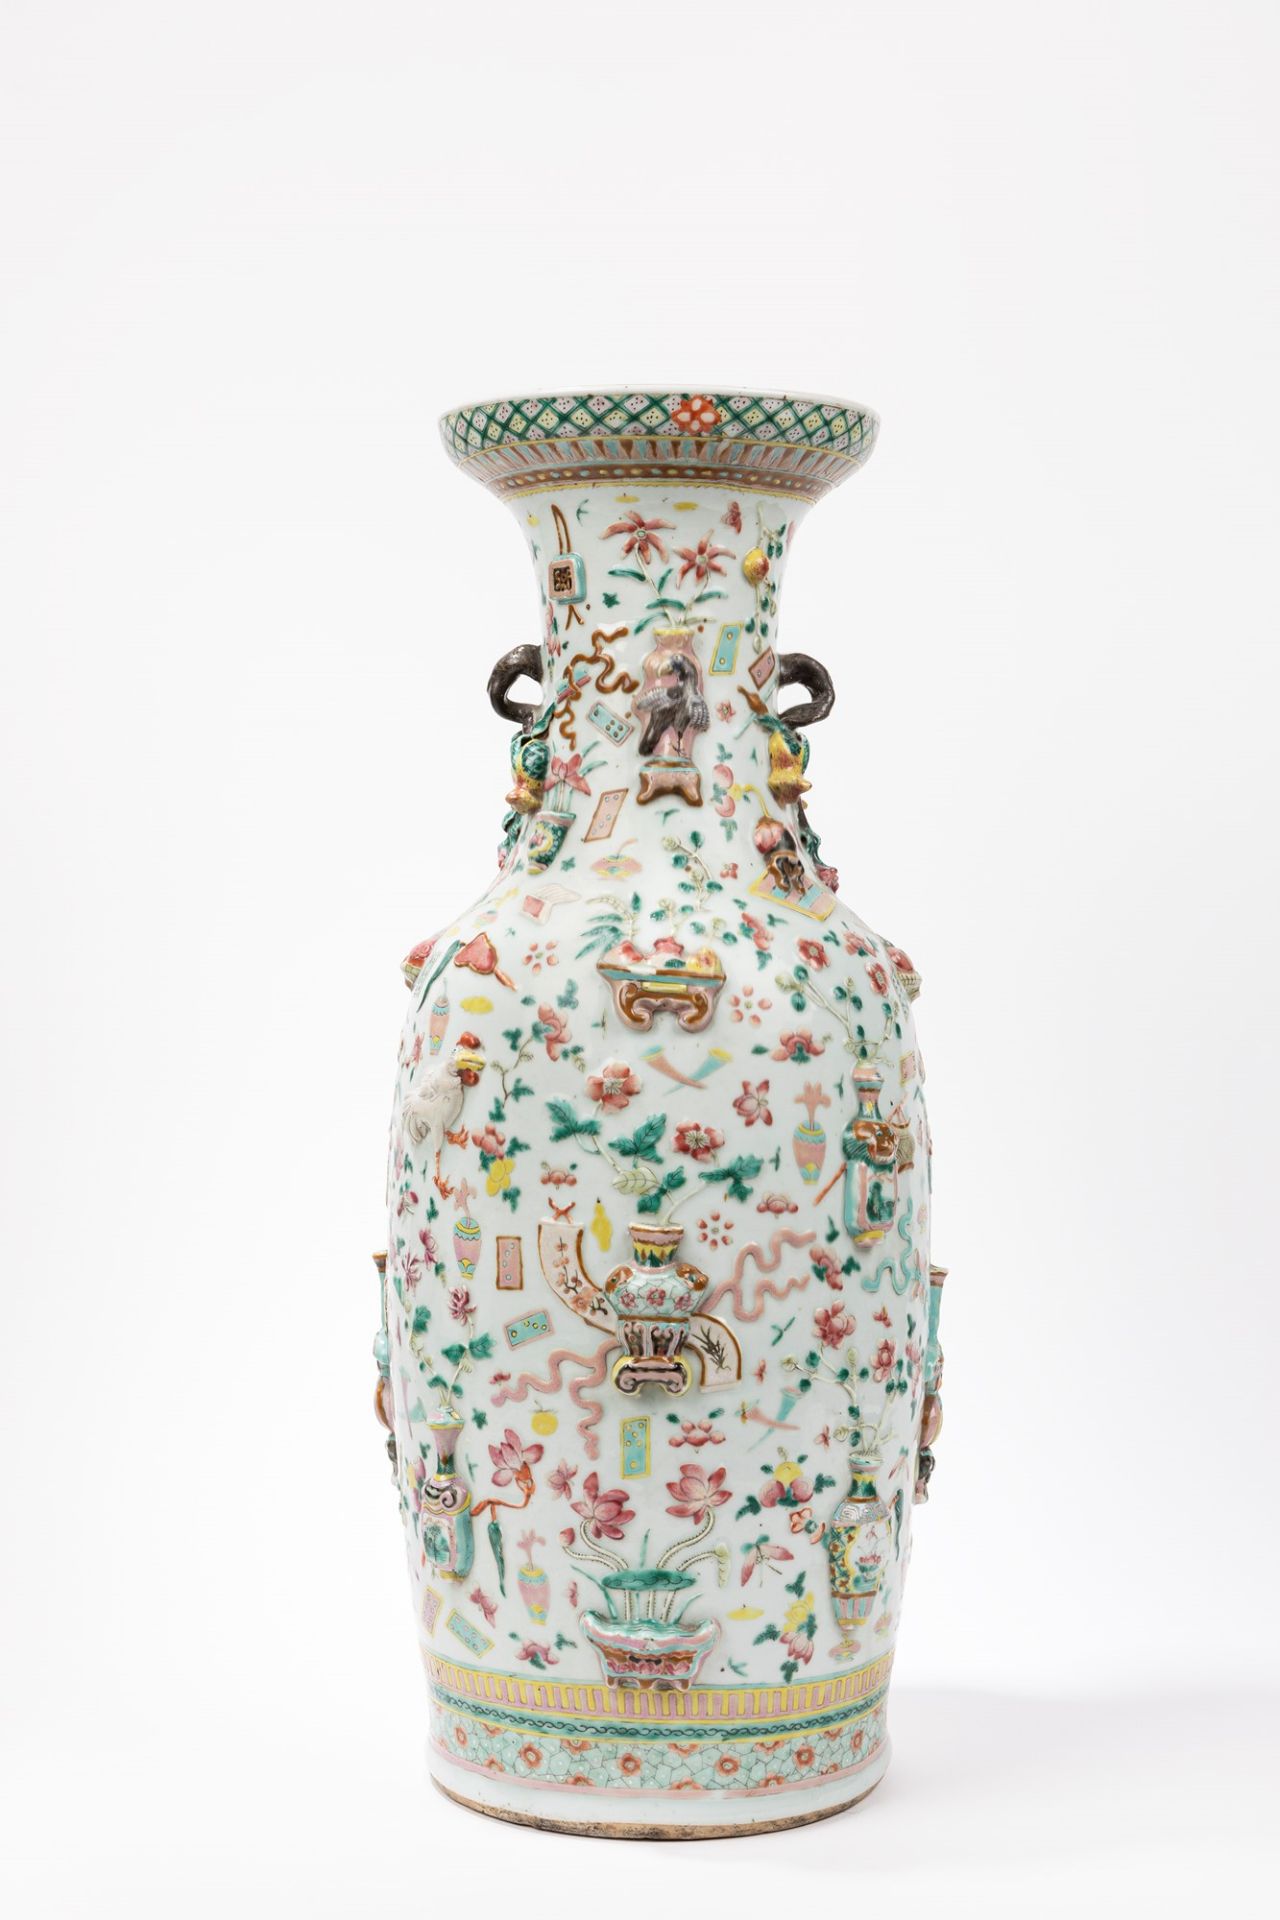 A FAMILLE ROSE PORCELAIN VASE, China, Qing dynasty, 19th century